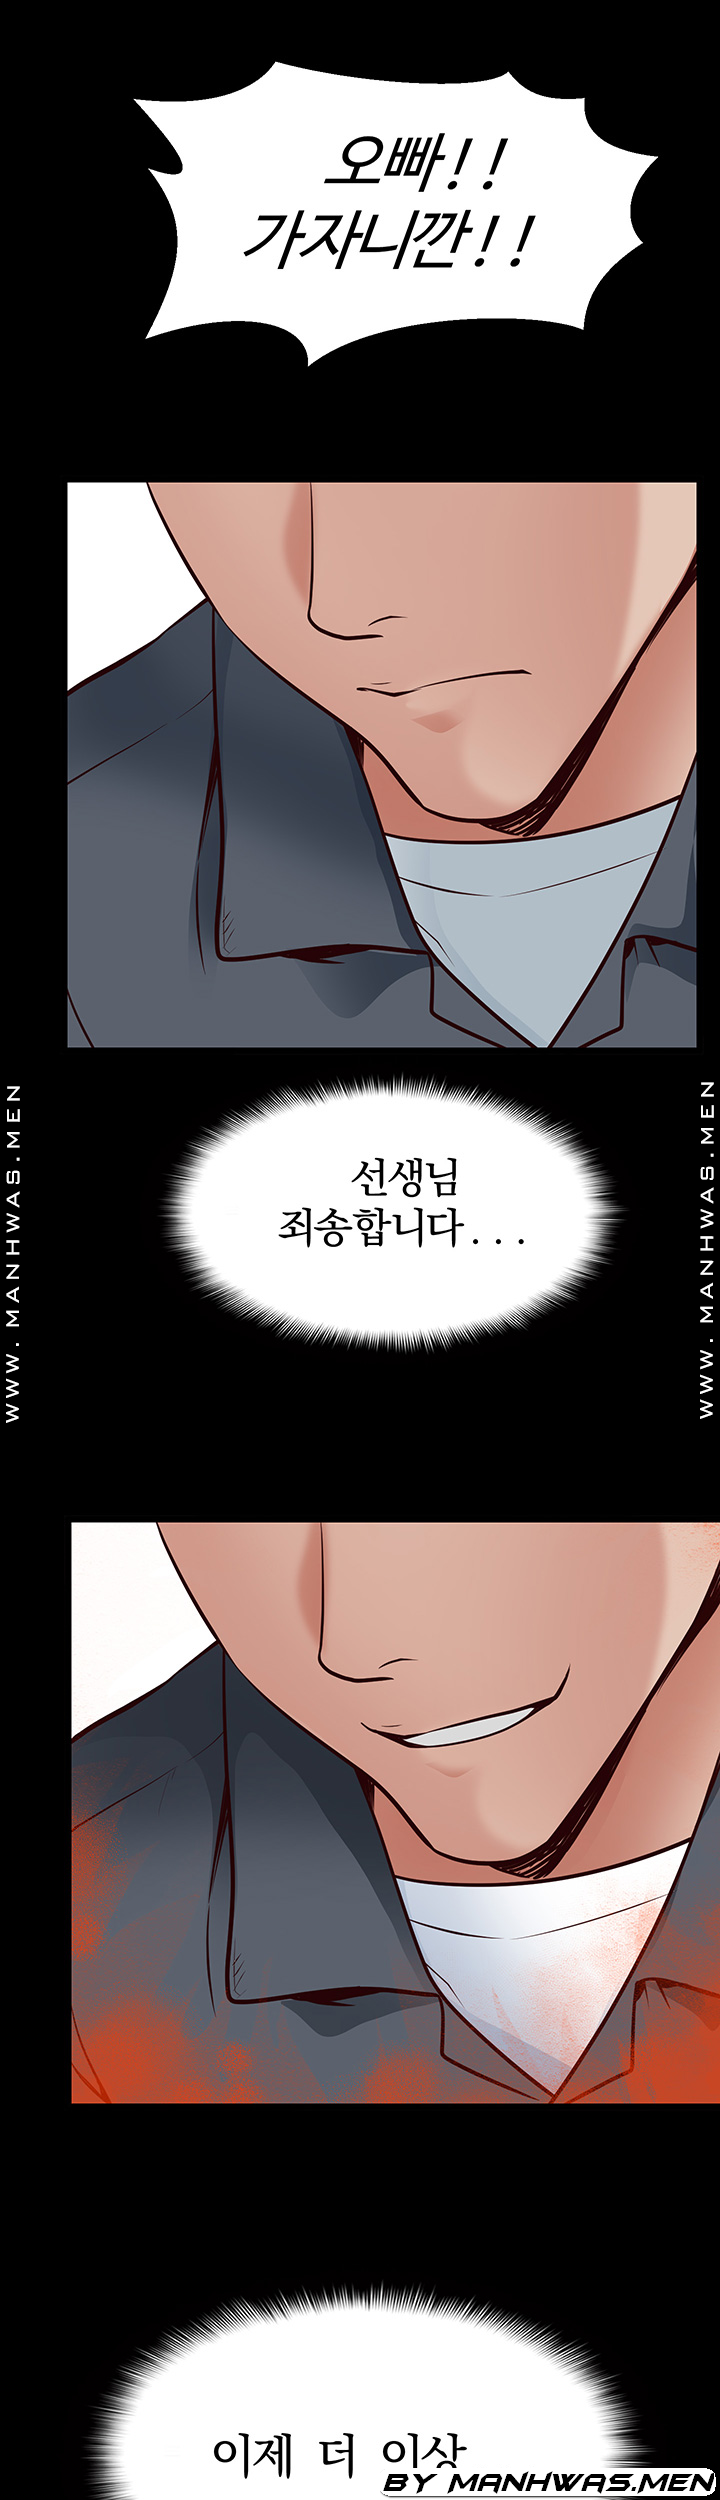 bs-anger-raw-chap-8-1